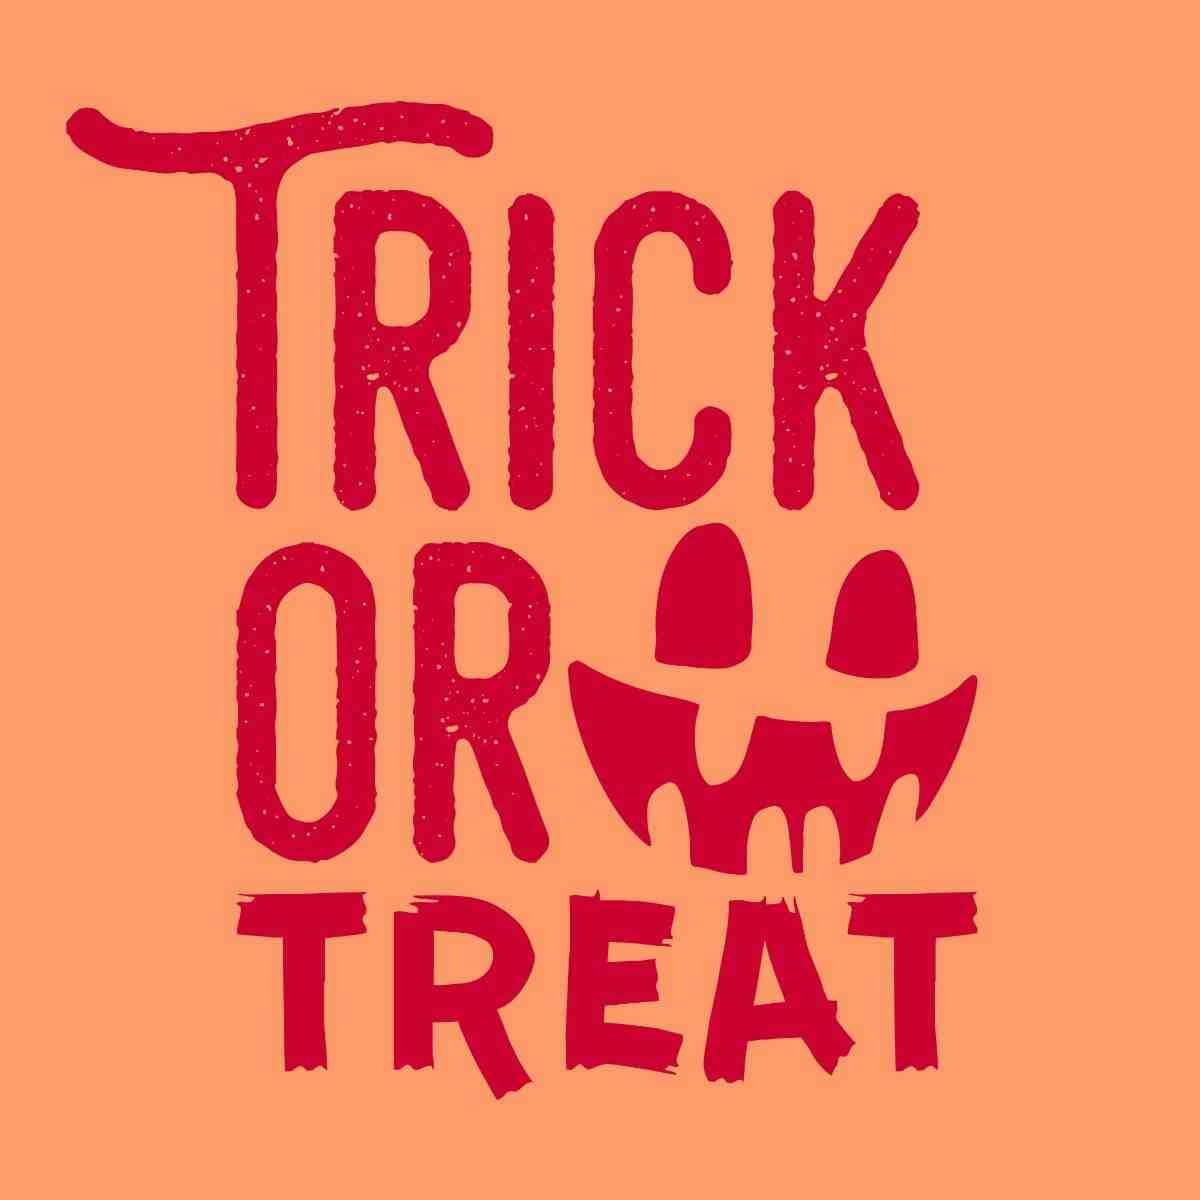 Card Trick or Treat